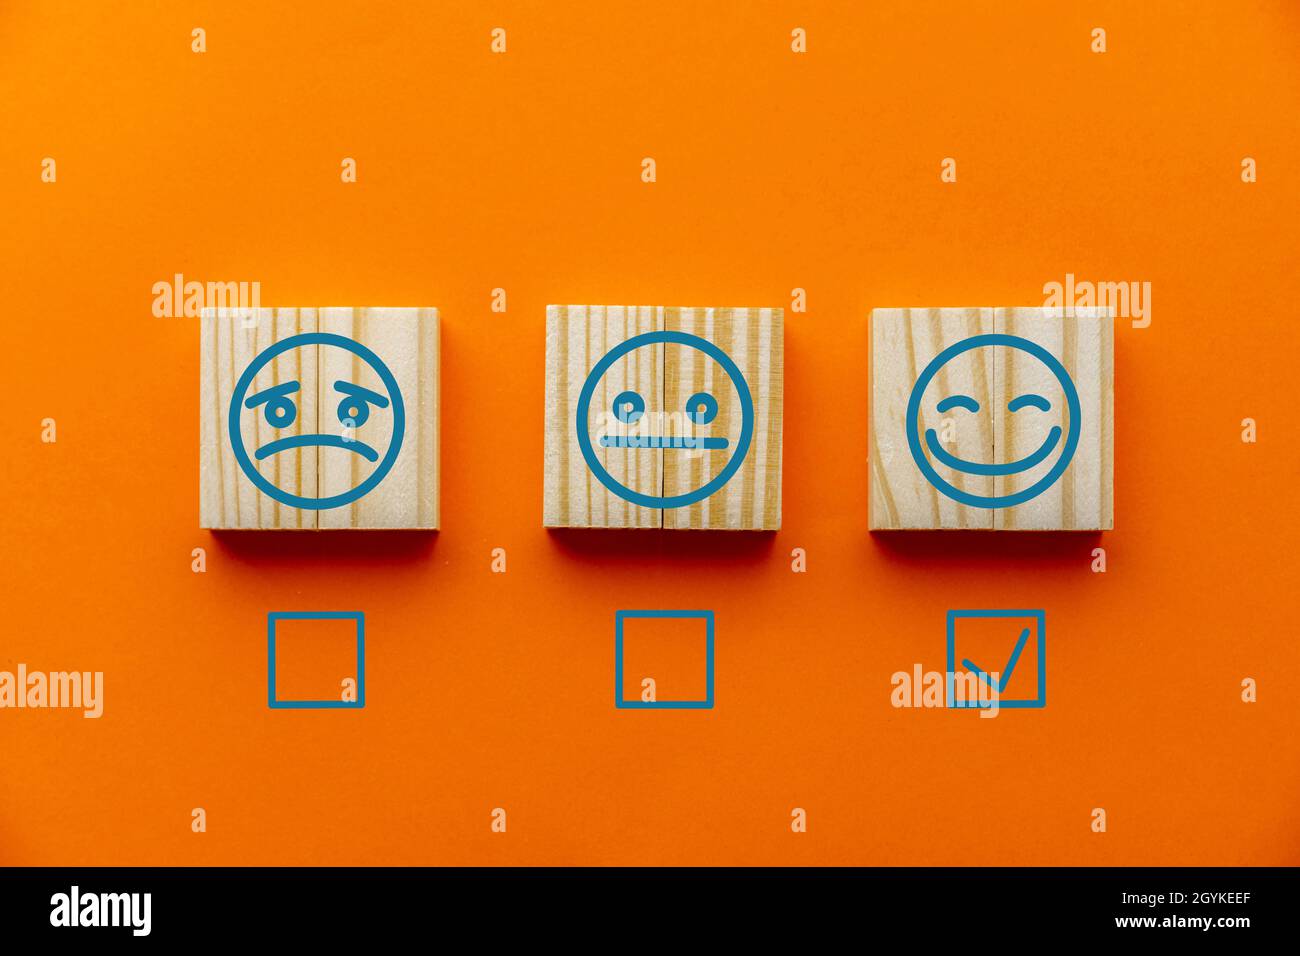 Orange background with emotion tiles and checkboxes for customer satisfaction surveys Stock Photo